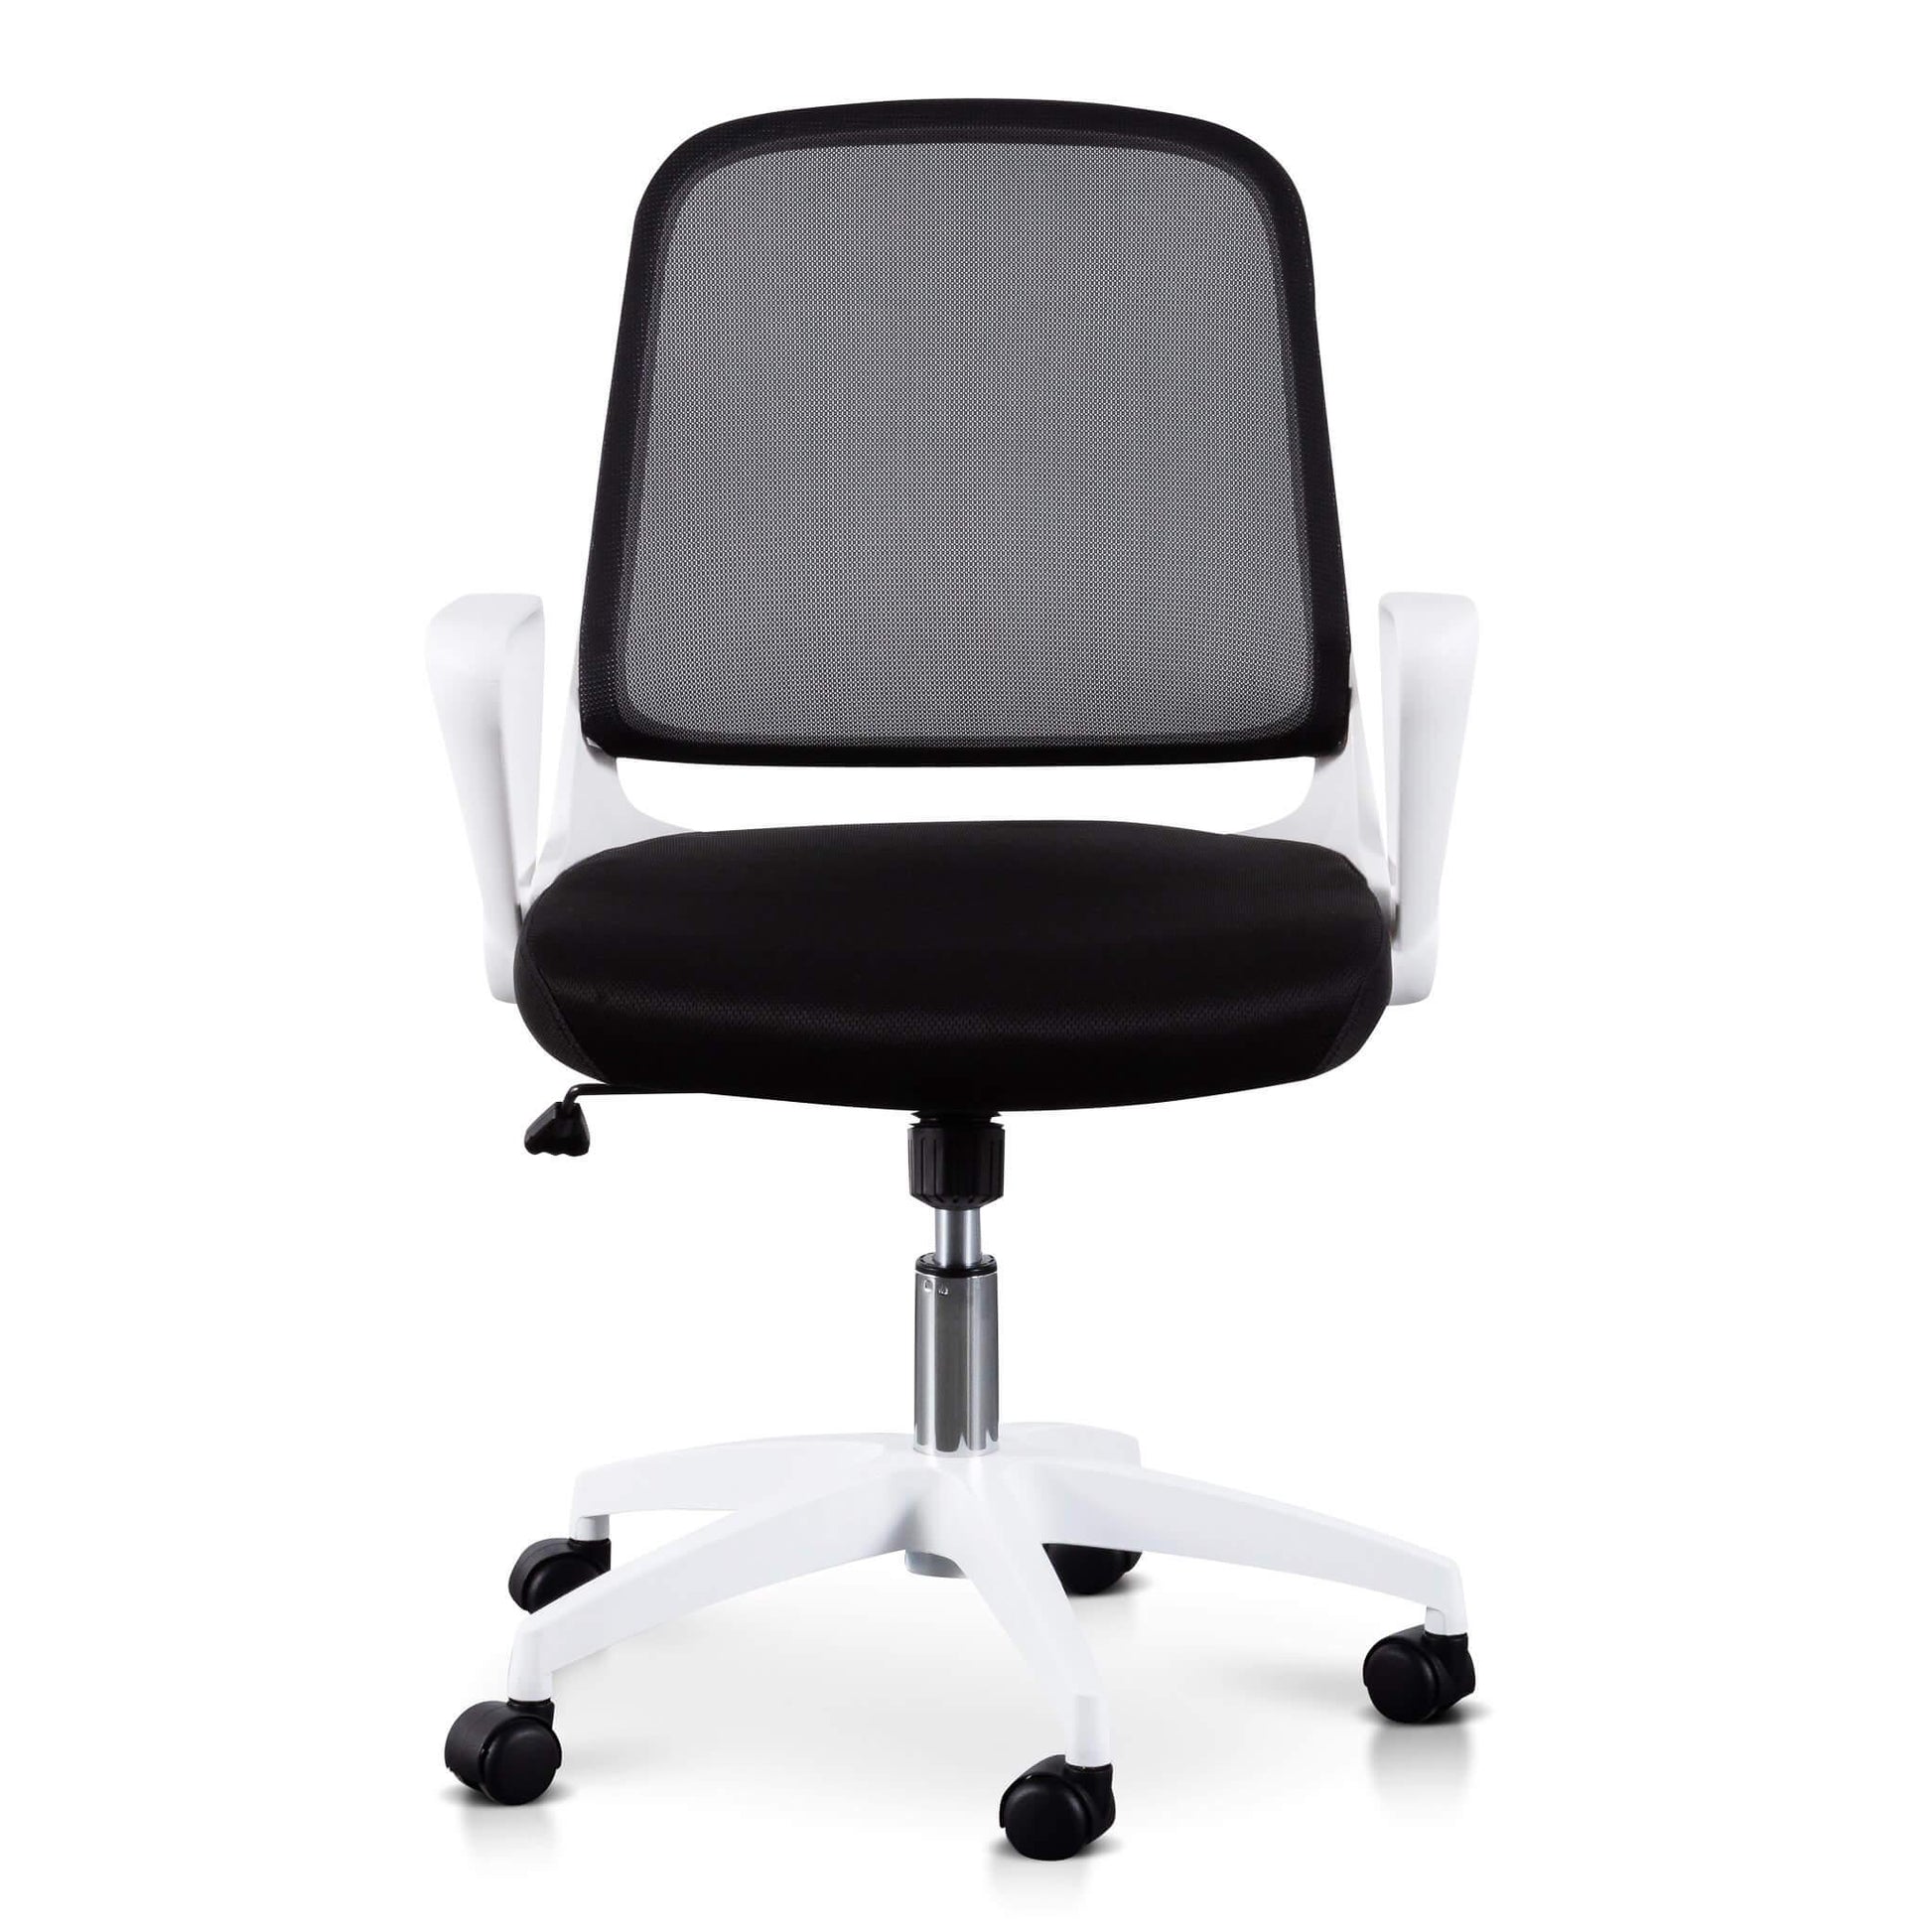 Calibre Black Office Chair - White Arm and Base OC6190-LF - Office/Gaming ChairsOC6190-LF 4